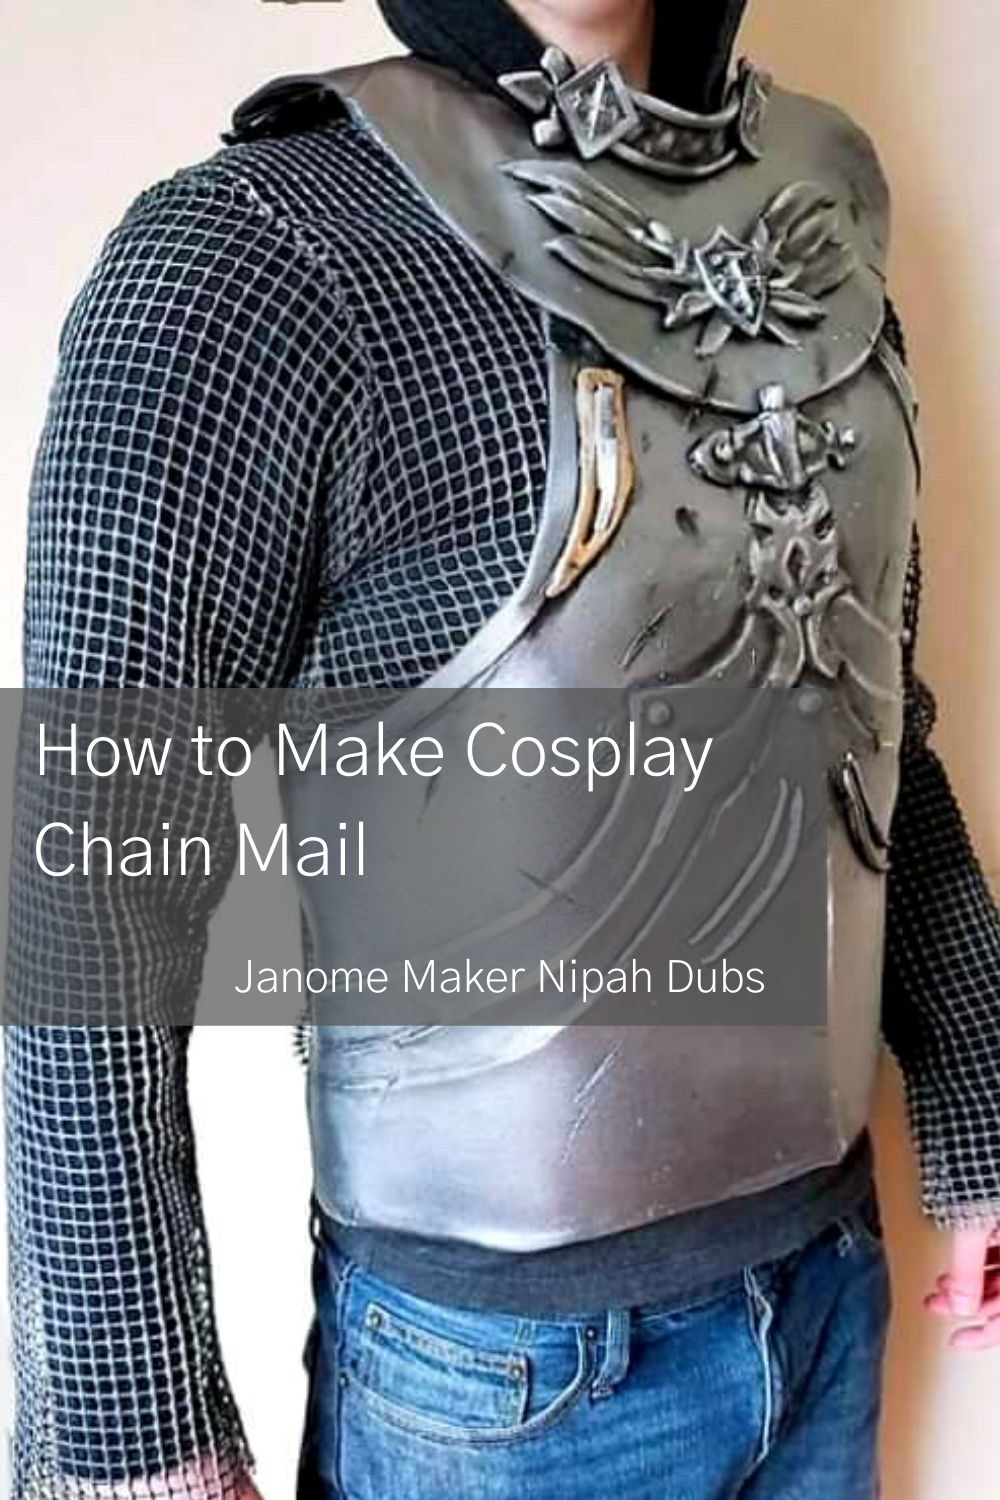 How To Make Cosplay Chainmail